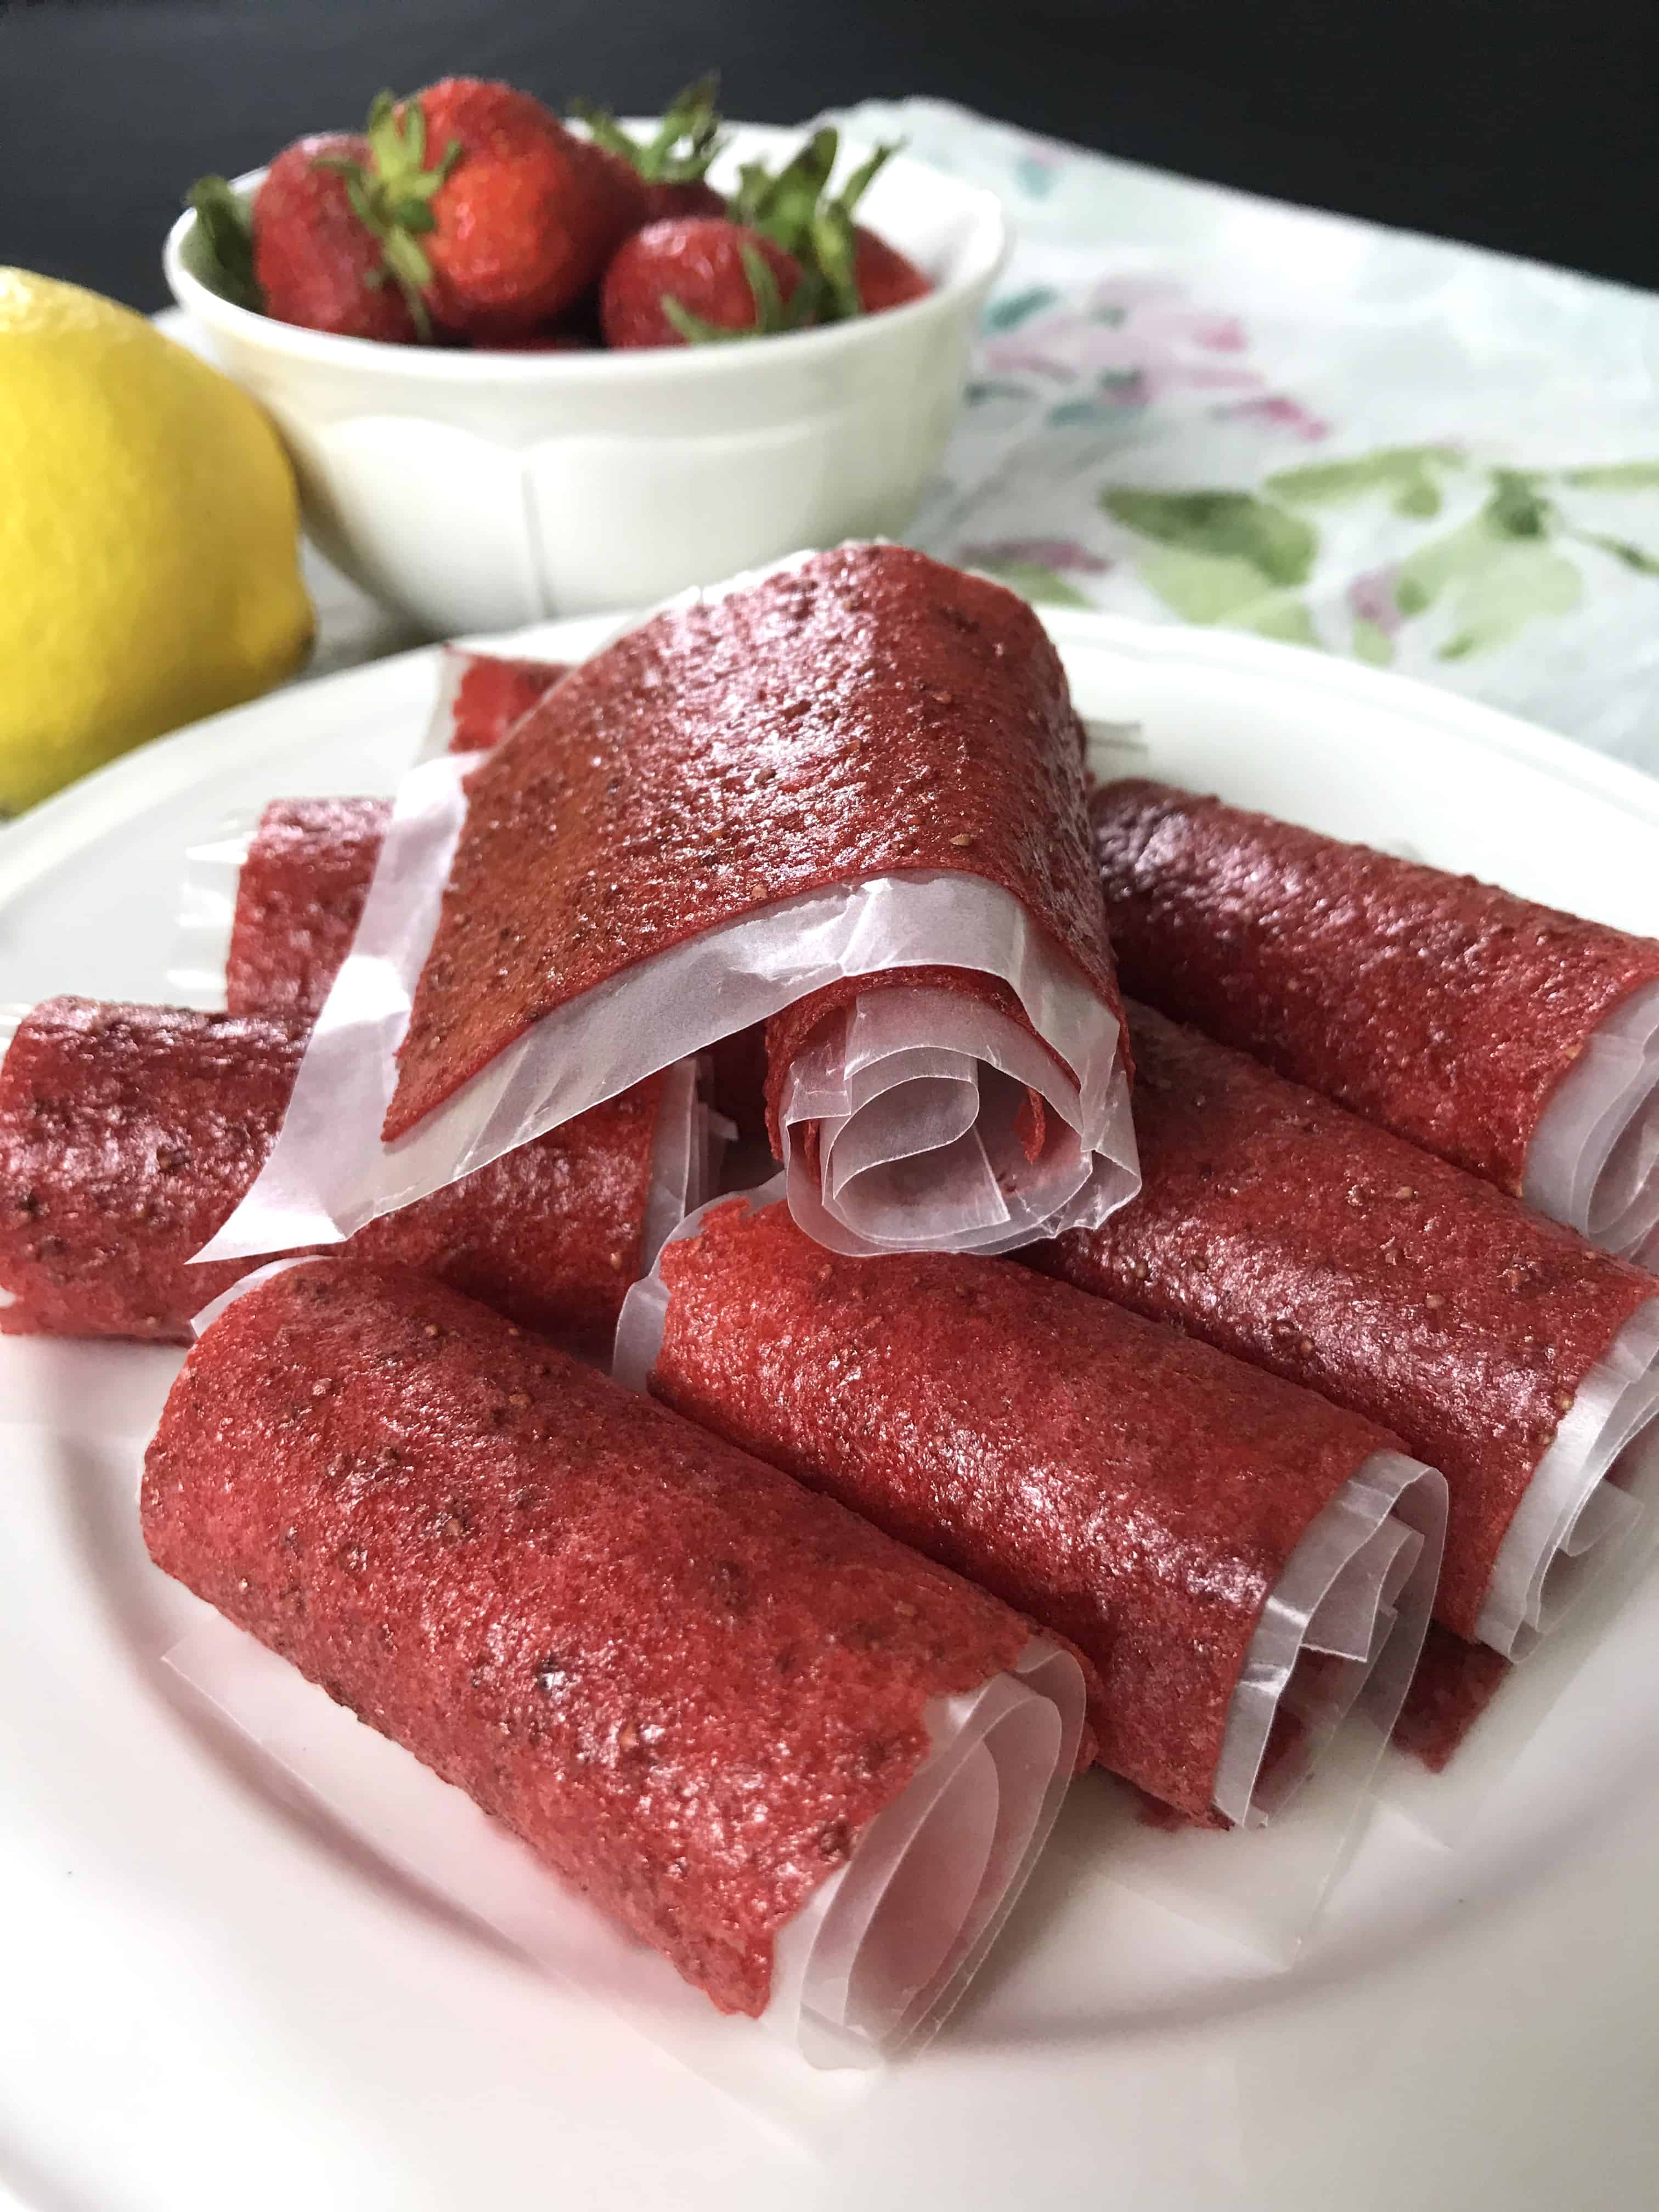 Homemade Fruit Leather: An Easy Recipe That Works With Any Fruit